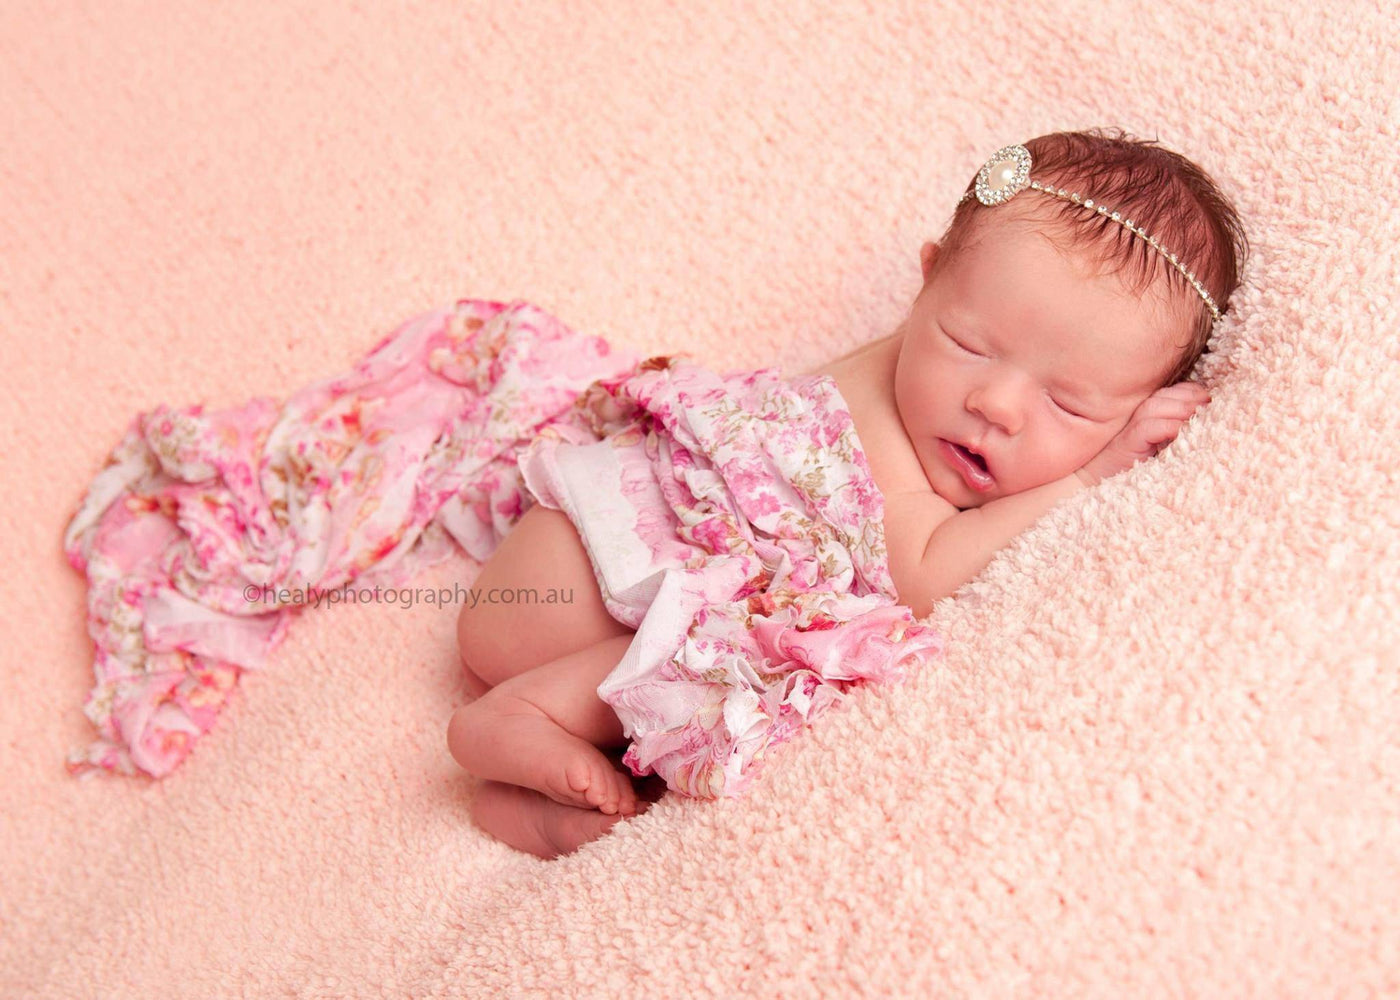 SALE Ruffle Stretch Knit Baby Wrap in Pink Floral 47X10 - Beautiful Photo Props